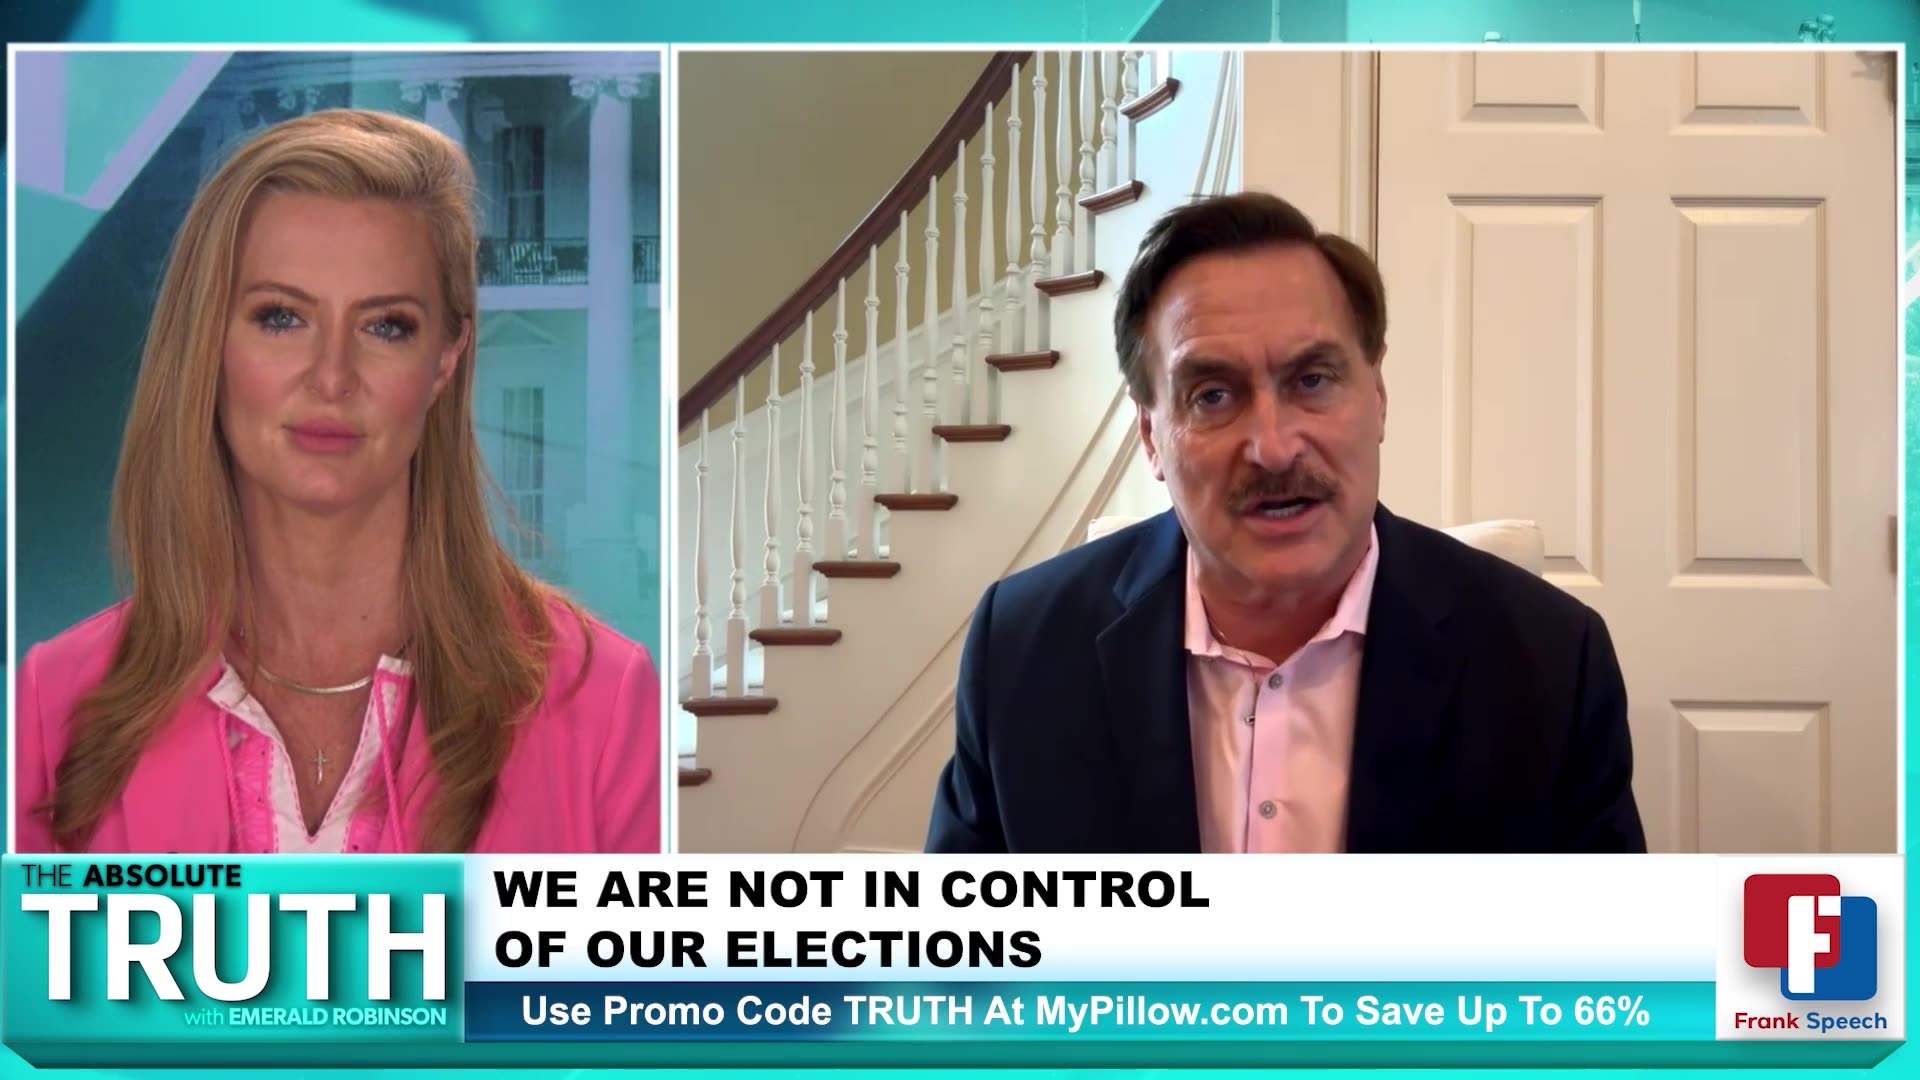 Mike Lindell Calls on ALL Vote-Rigging Companies to Open Their Machines and Come Clean